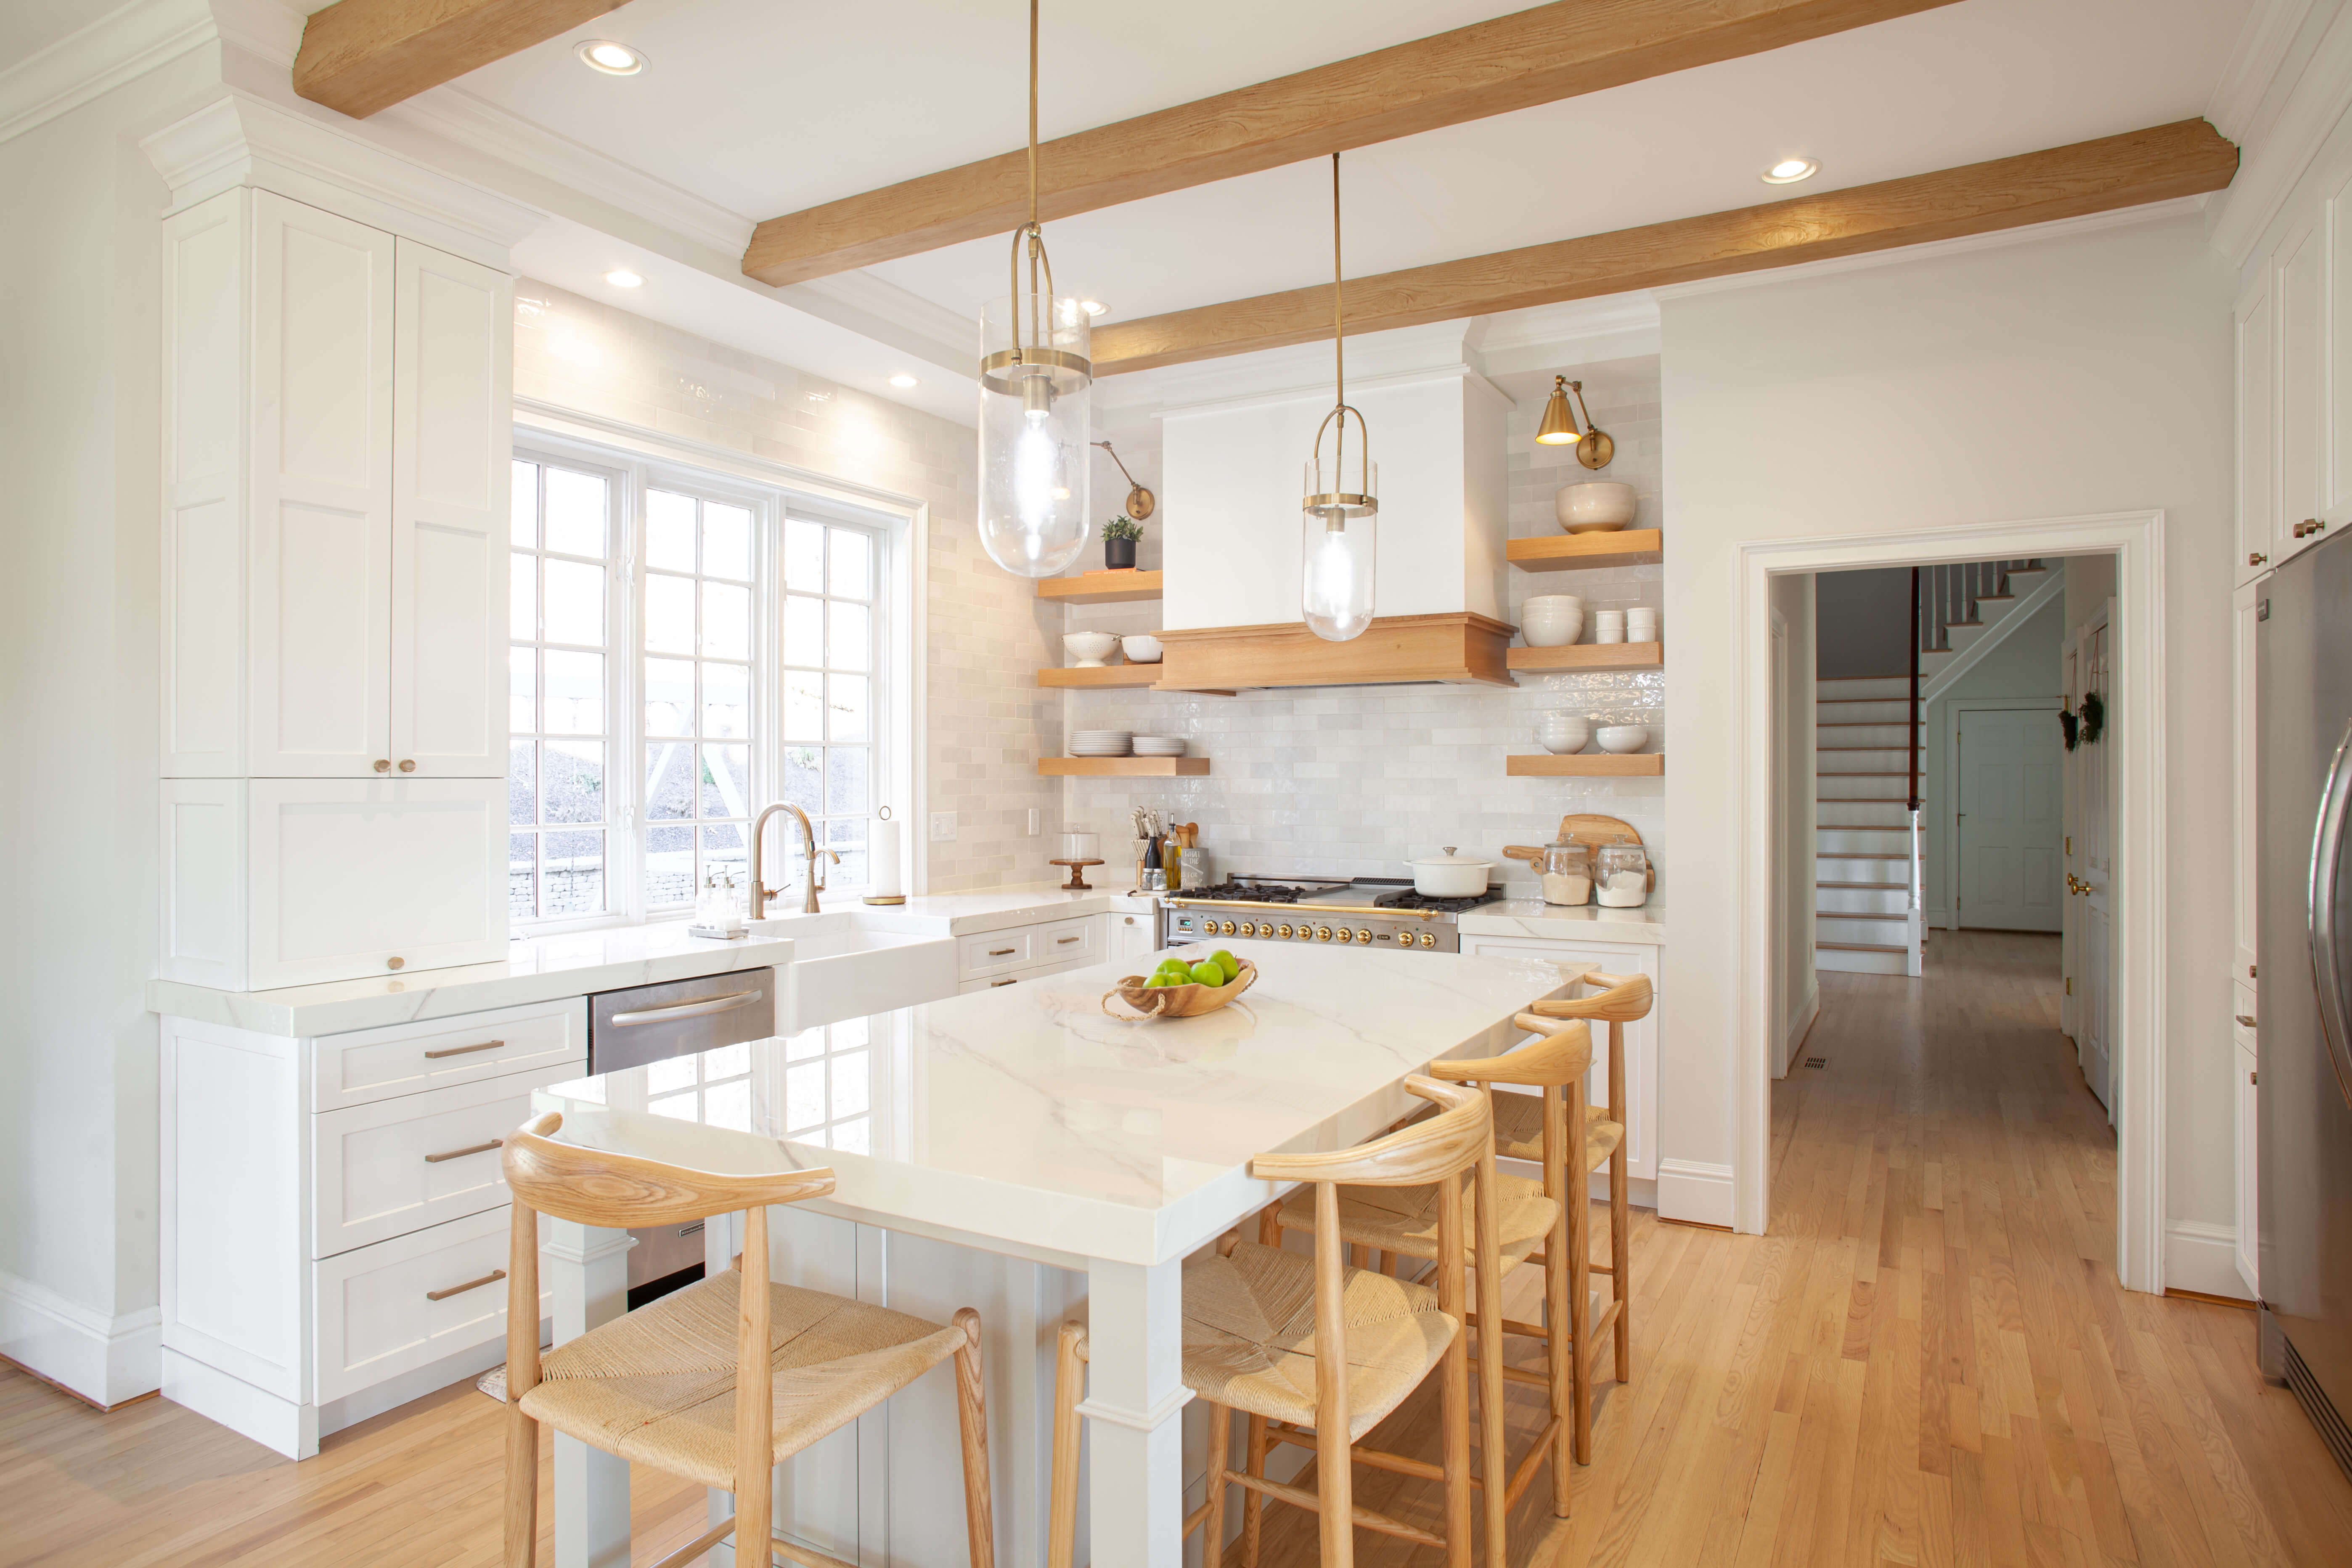 A beautiful kitchen remodel with all-white painted cabinets and light stained oak wood accents.